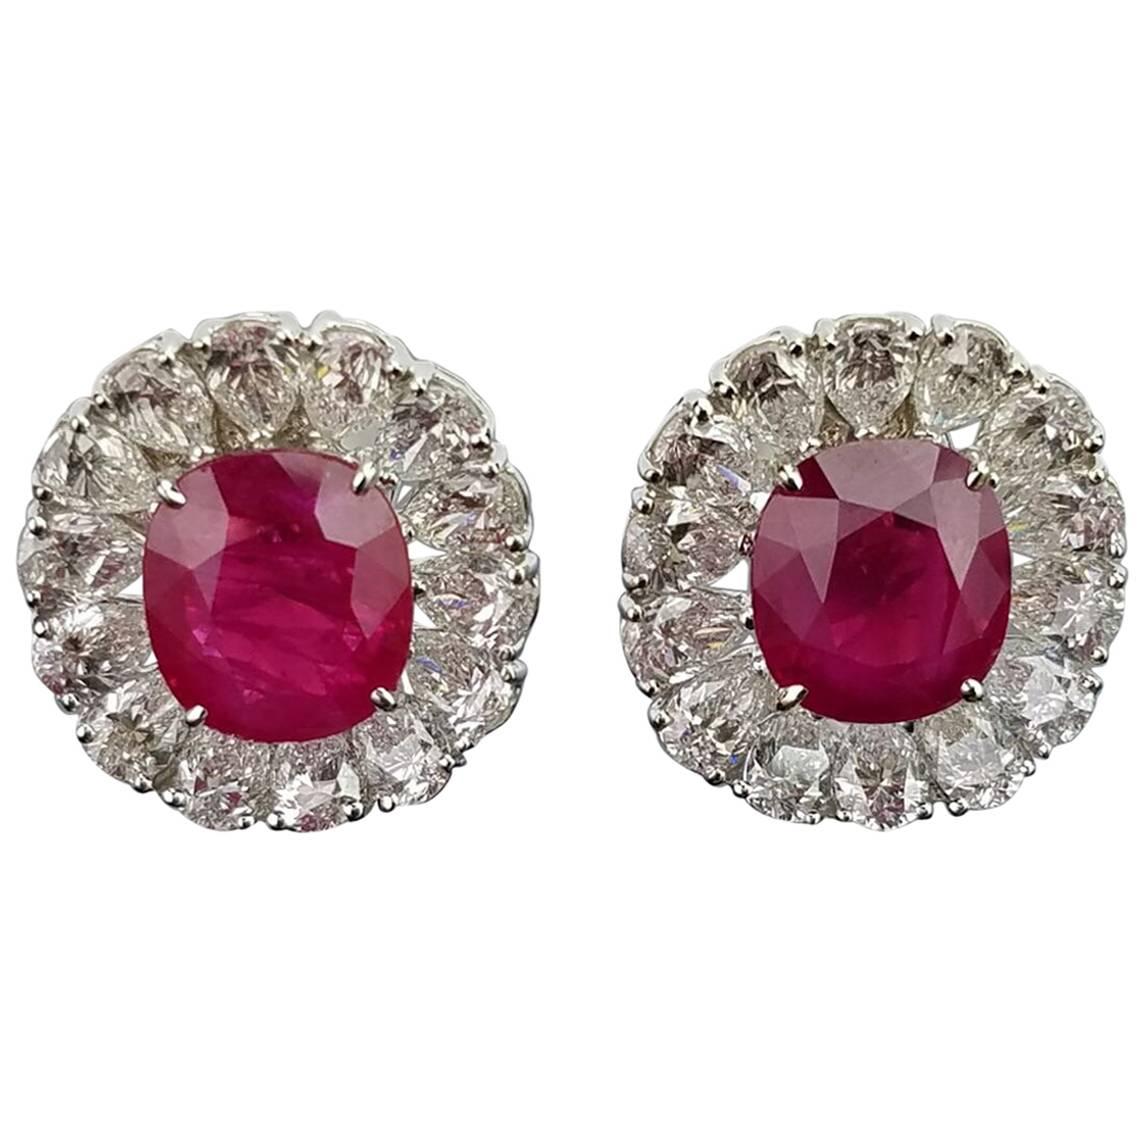 Certified 8.11 Carat Burma Ruby and Diamond Studs Earring For Sale